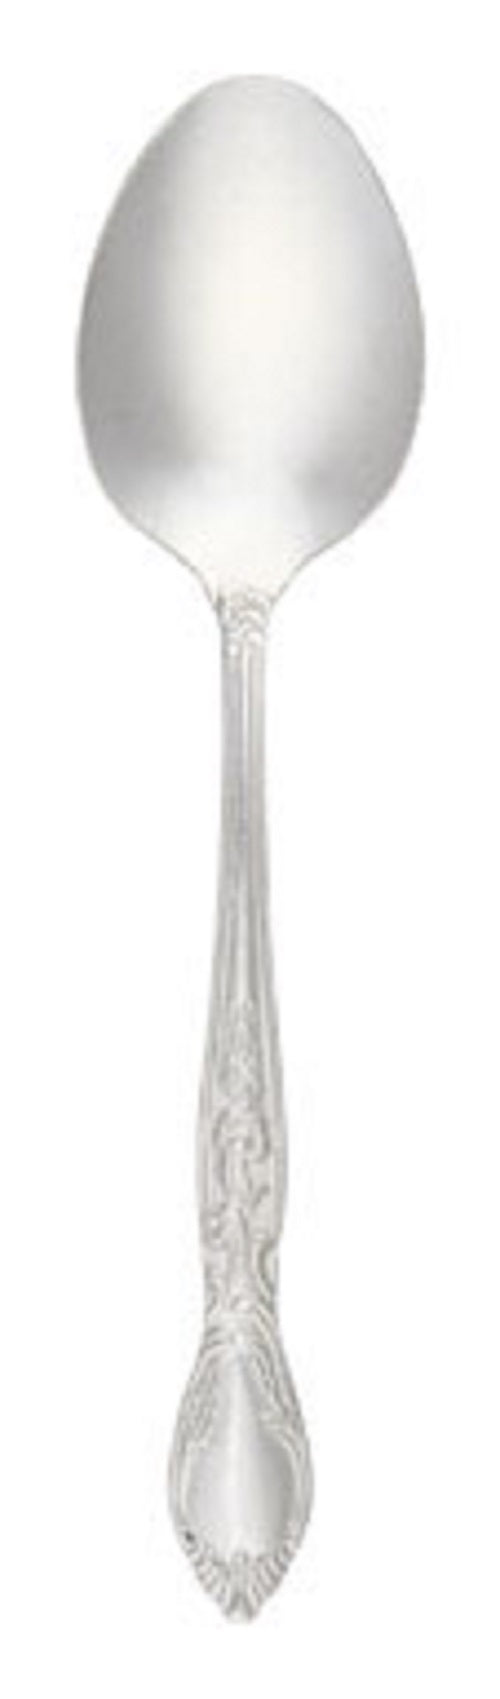 buy tabletop flatware at cheap rate in bulk. wholesale & retail kitchen accessories & materials store.